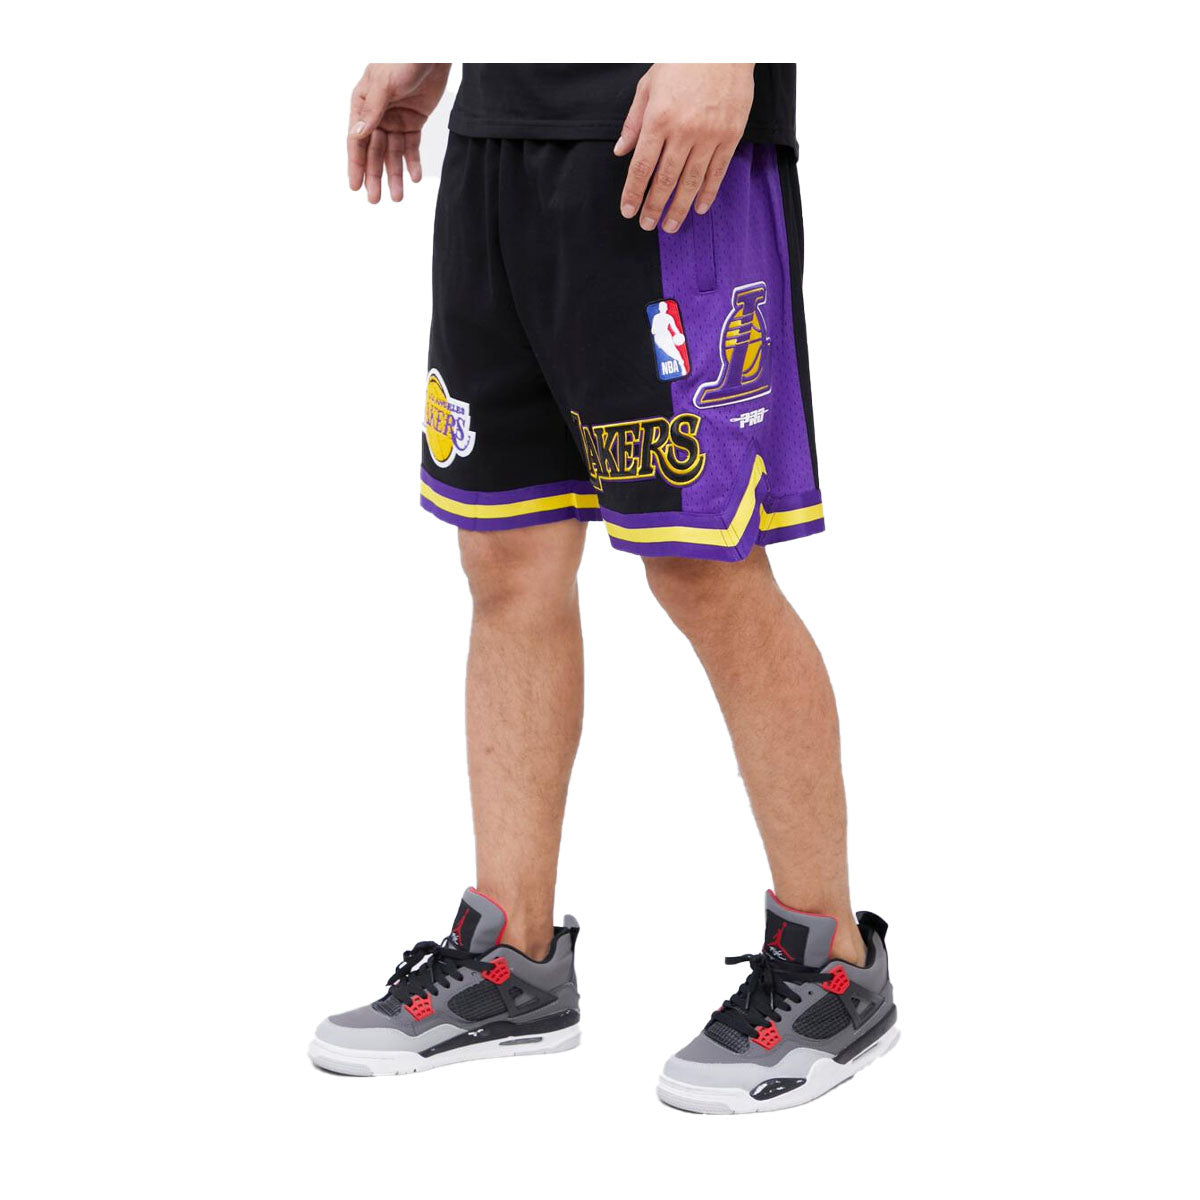 Pro Cut Los Angeles Lakers Jersey Shorts 38 +2 Champion Authentic